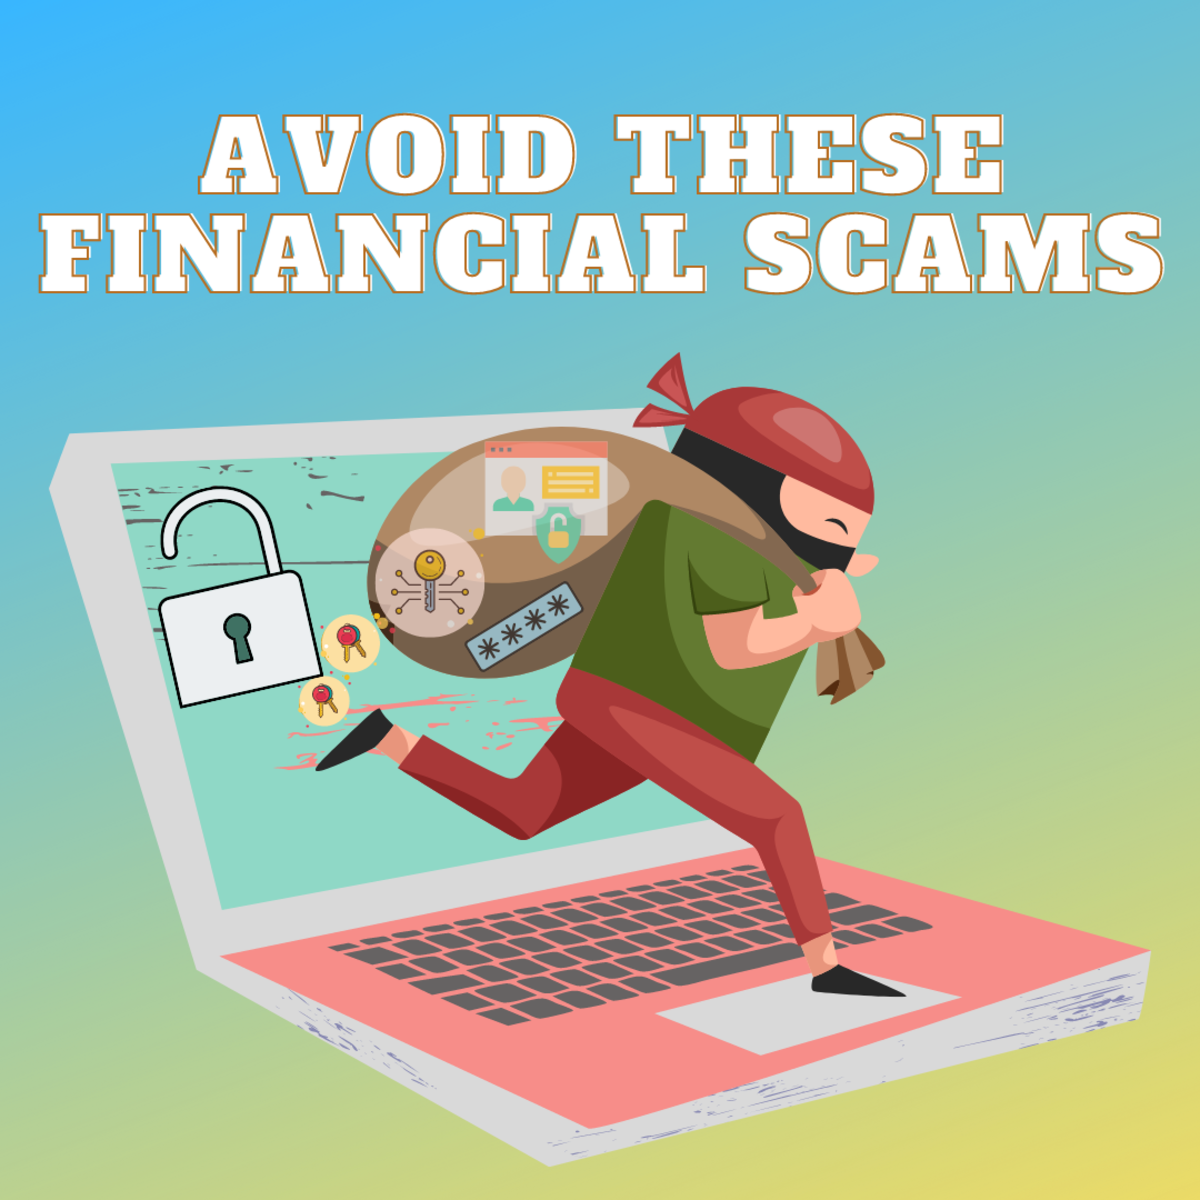 Top 14 Financial Scams You Should Know About and How to Avoid Them